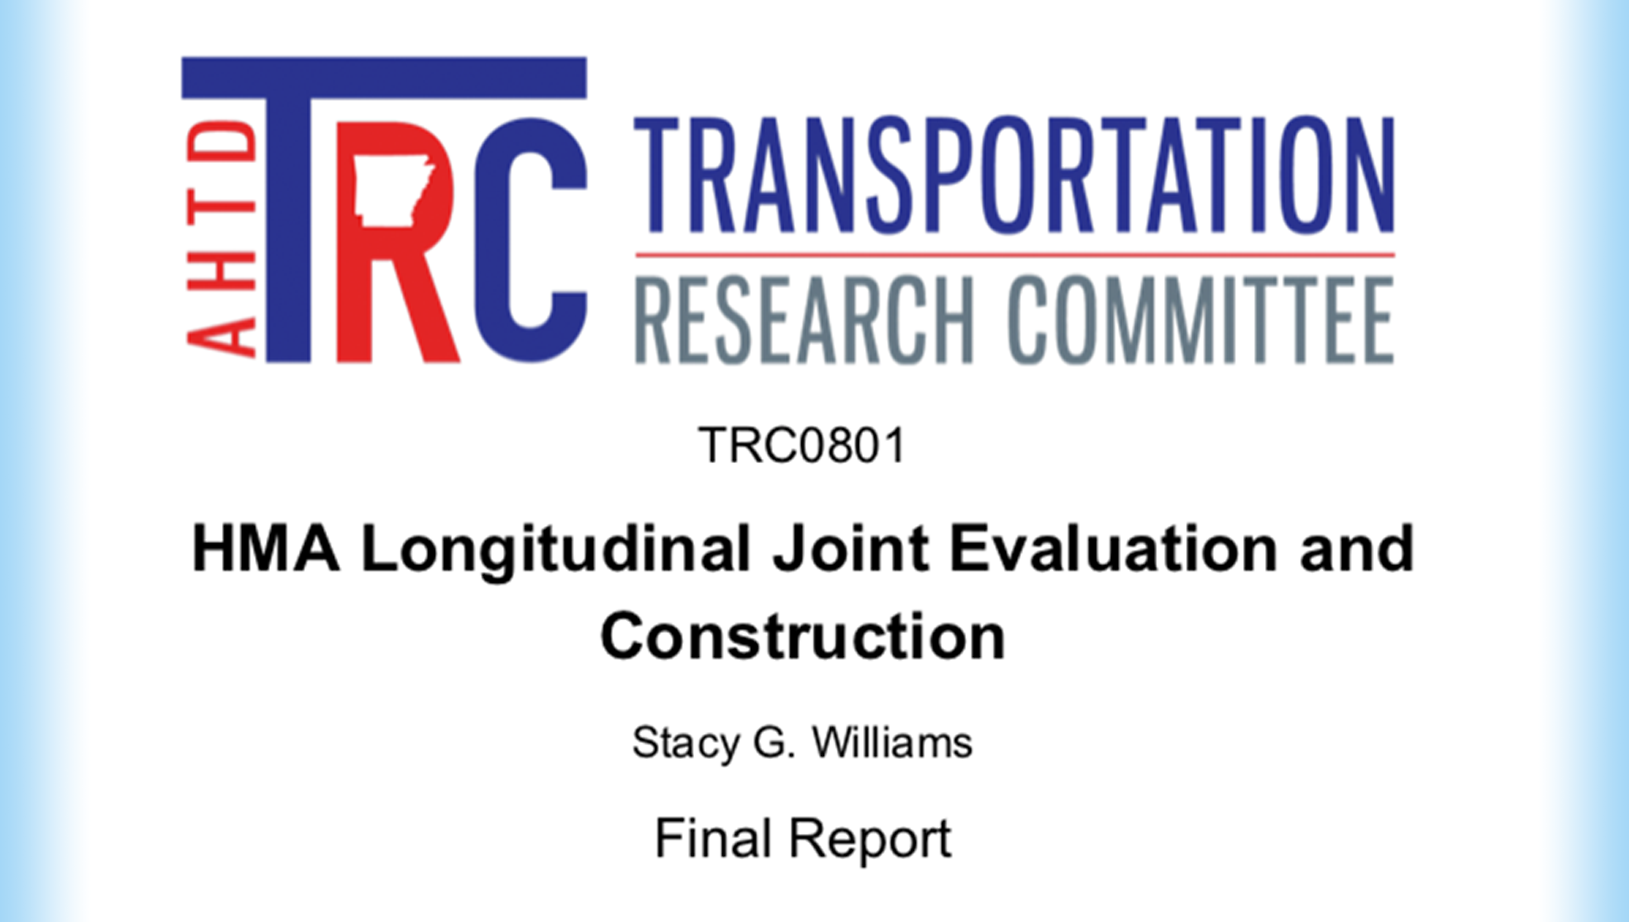 Call to action image - Transportation Research Committee HMA Longitudinal Joint Evaluation and Constructions - Stacy G. Williams - Final Report